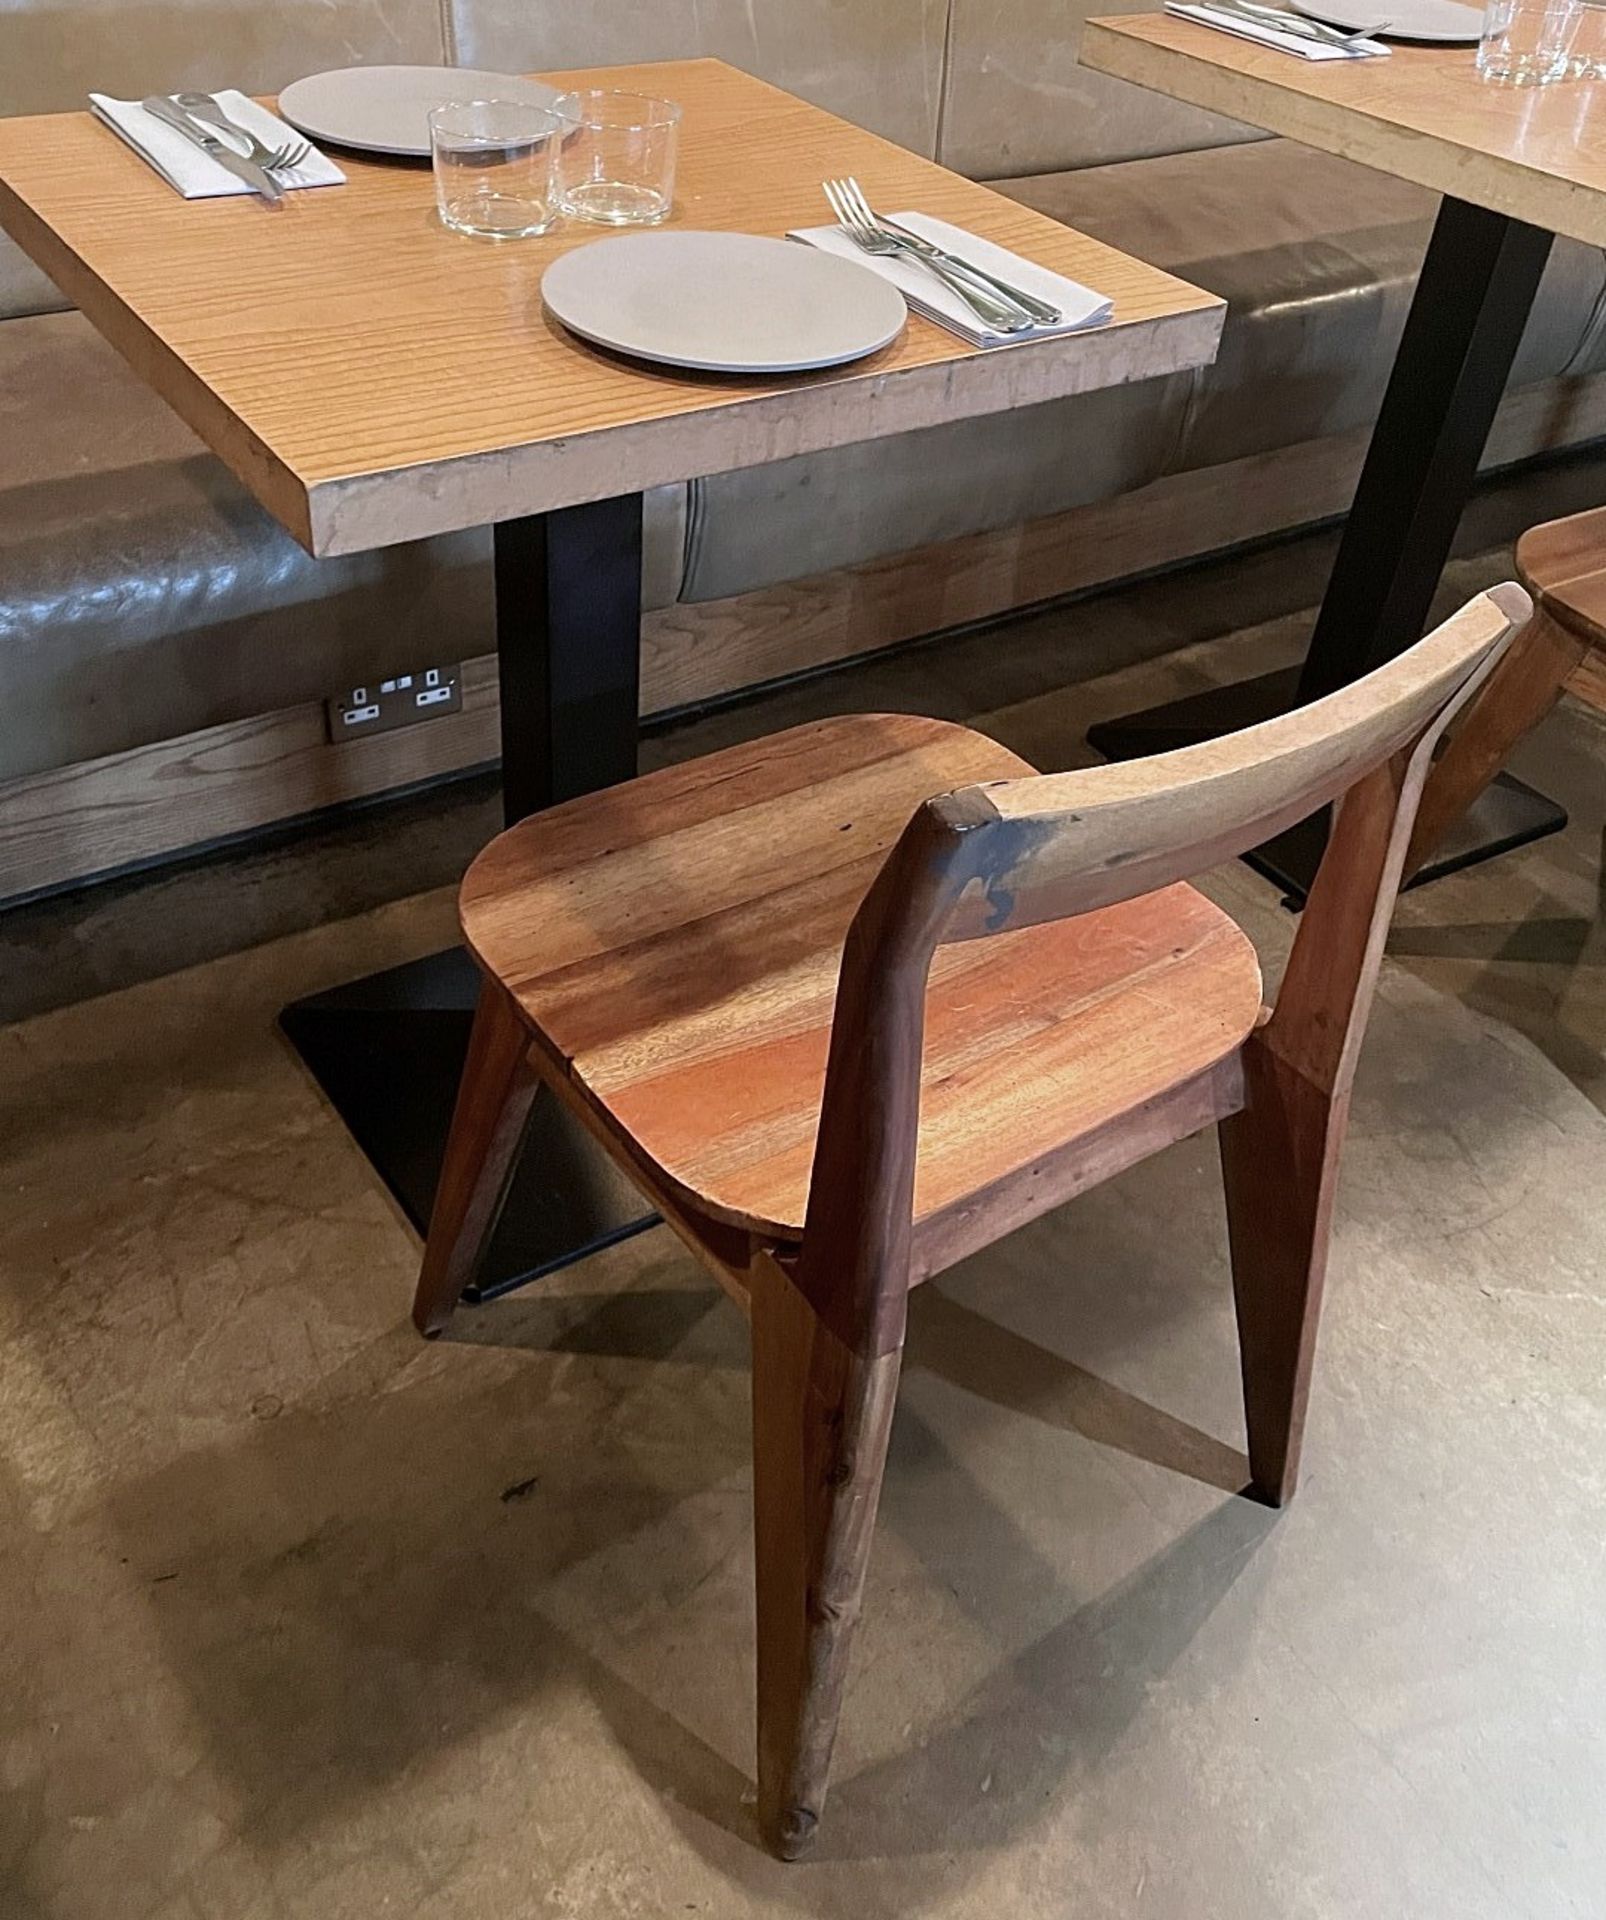 12 x Solid Wood Bistro Dining Chairs - Ref: MAN141 - CL677 - Location: London W1FThis item is to - Image 9 of 12